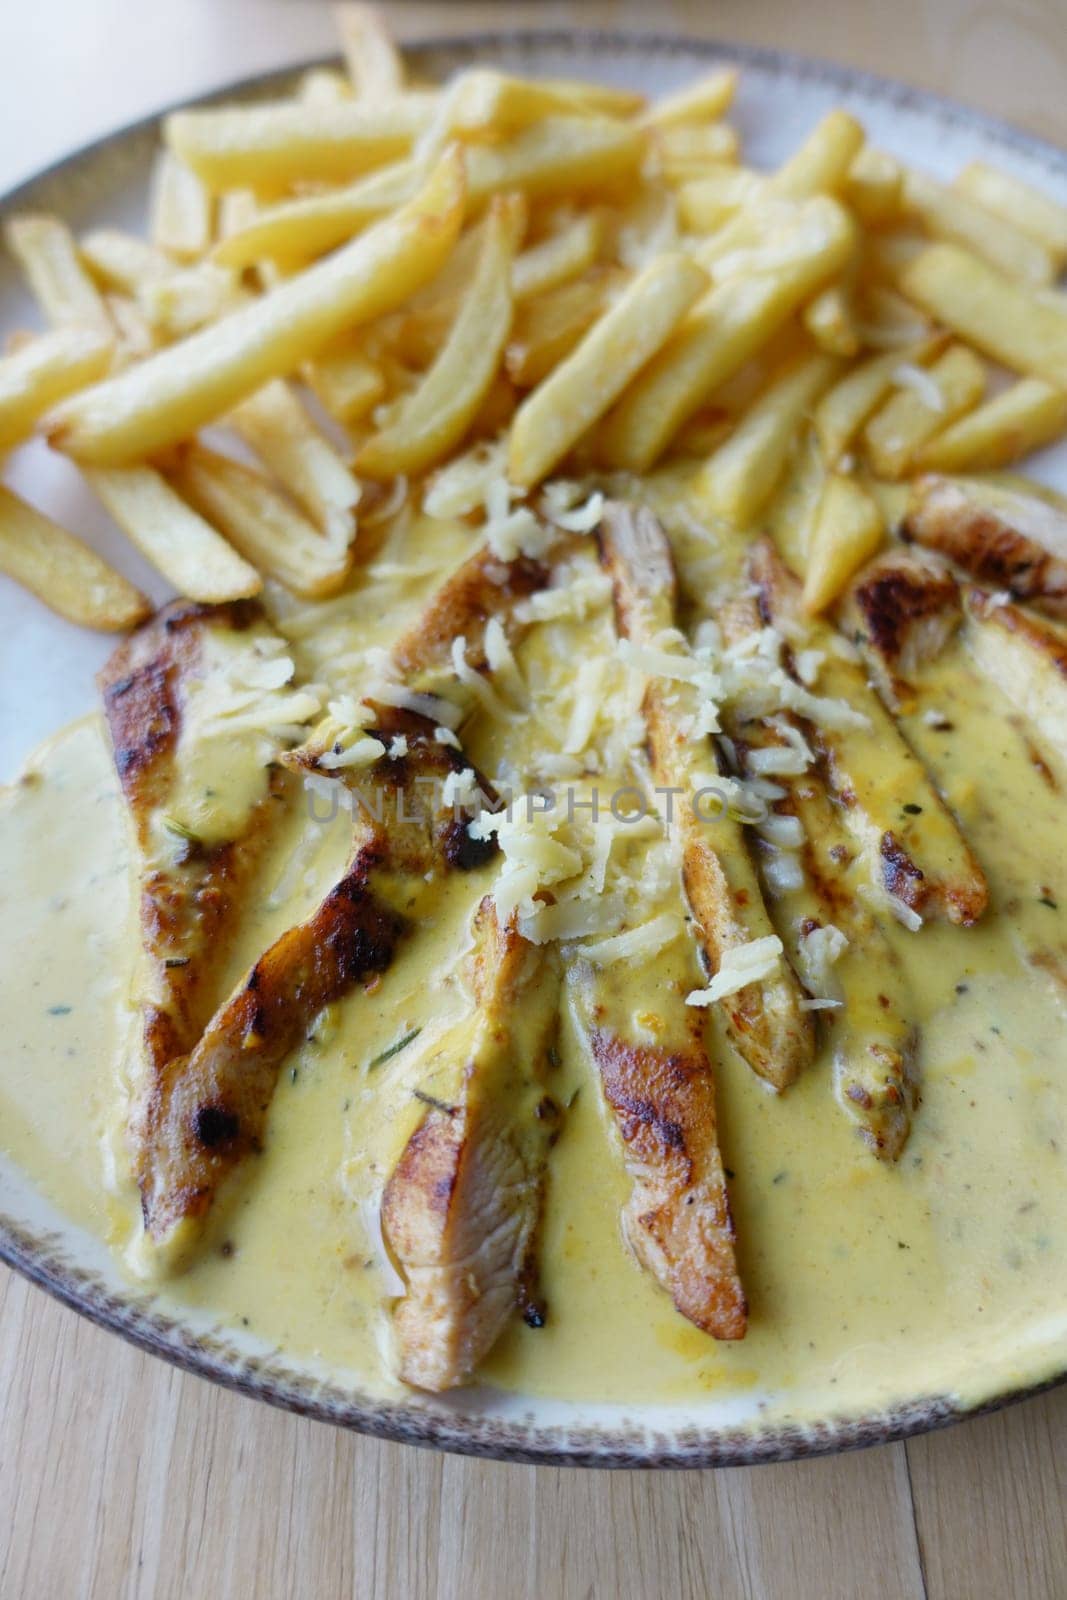 Ready to eat sliced chicken with cream sauce with french fries on a plate .